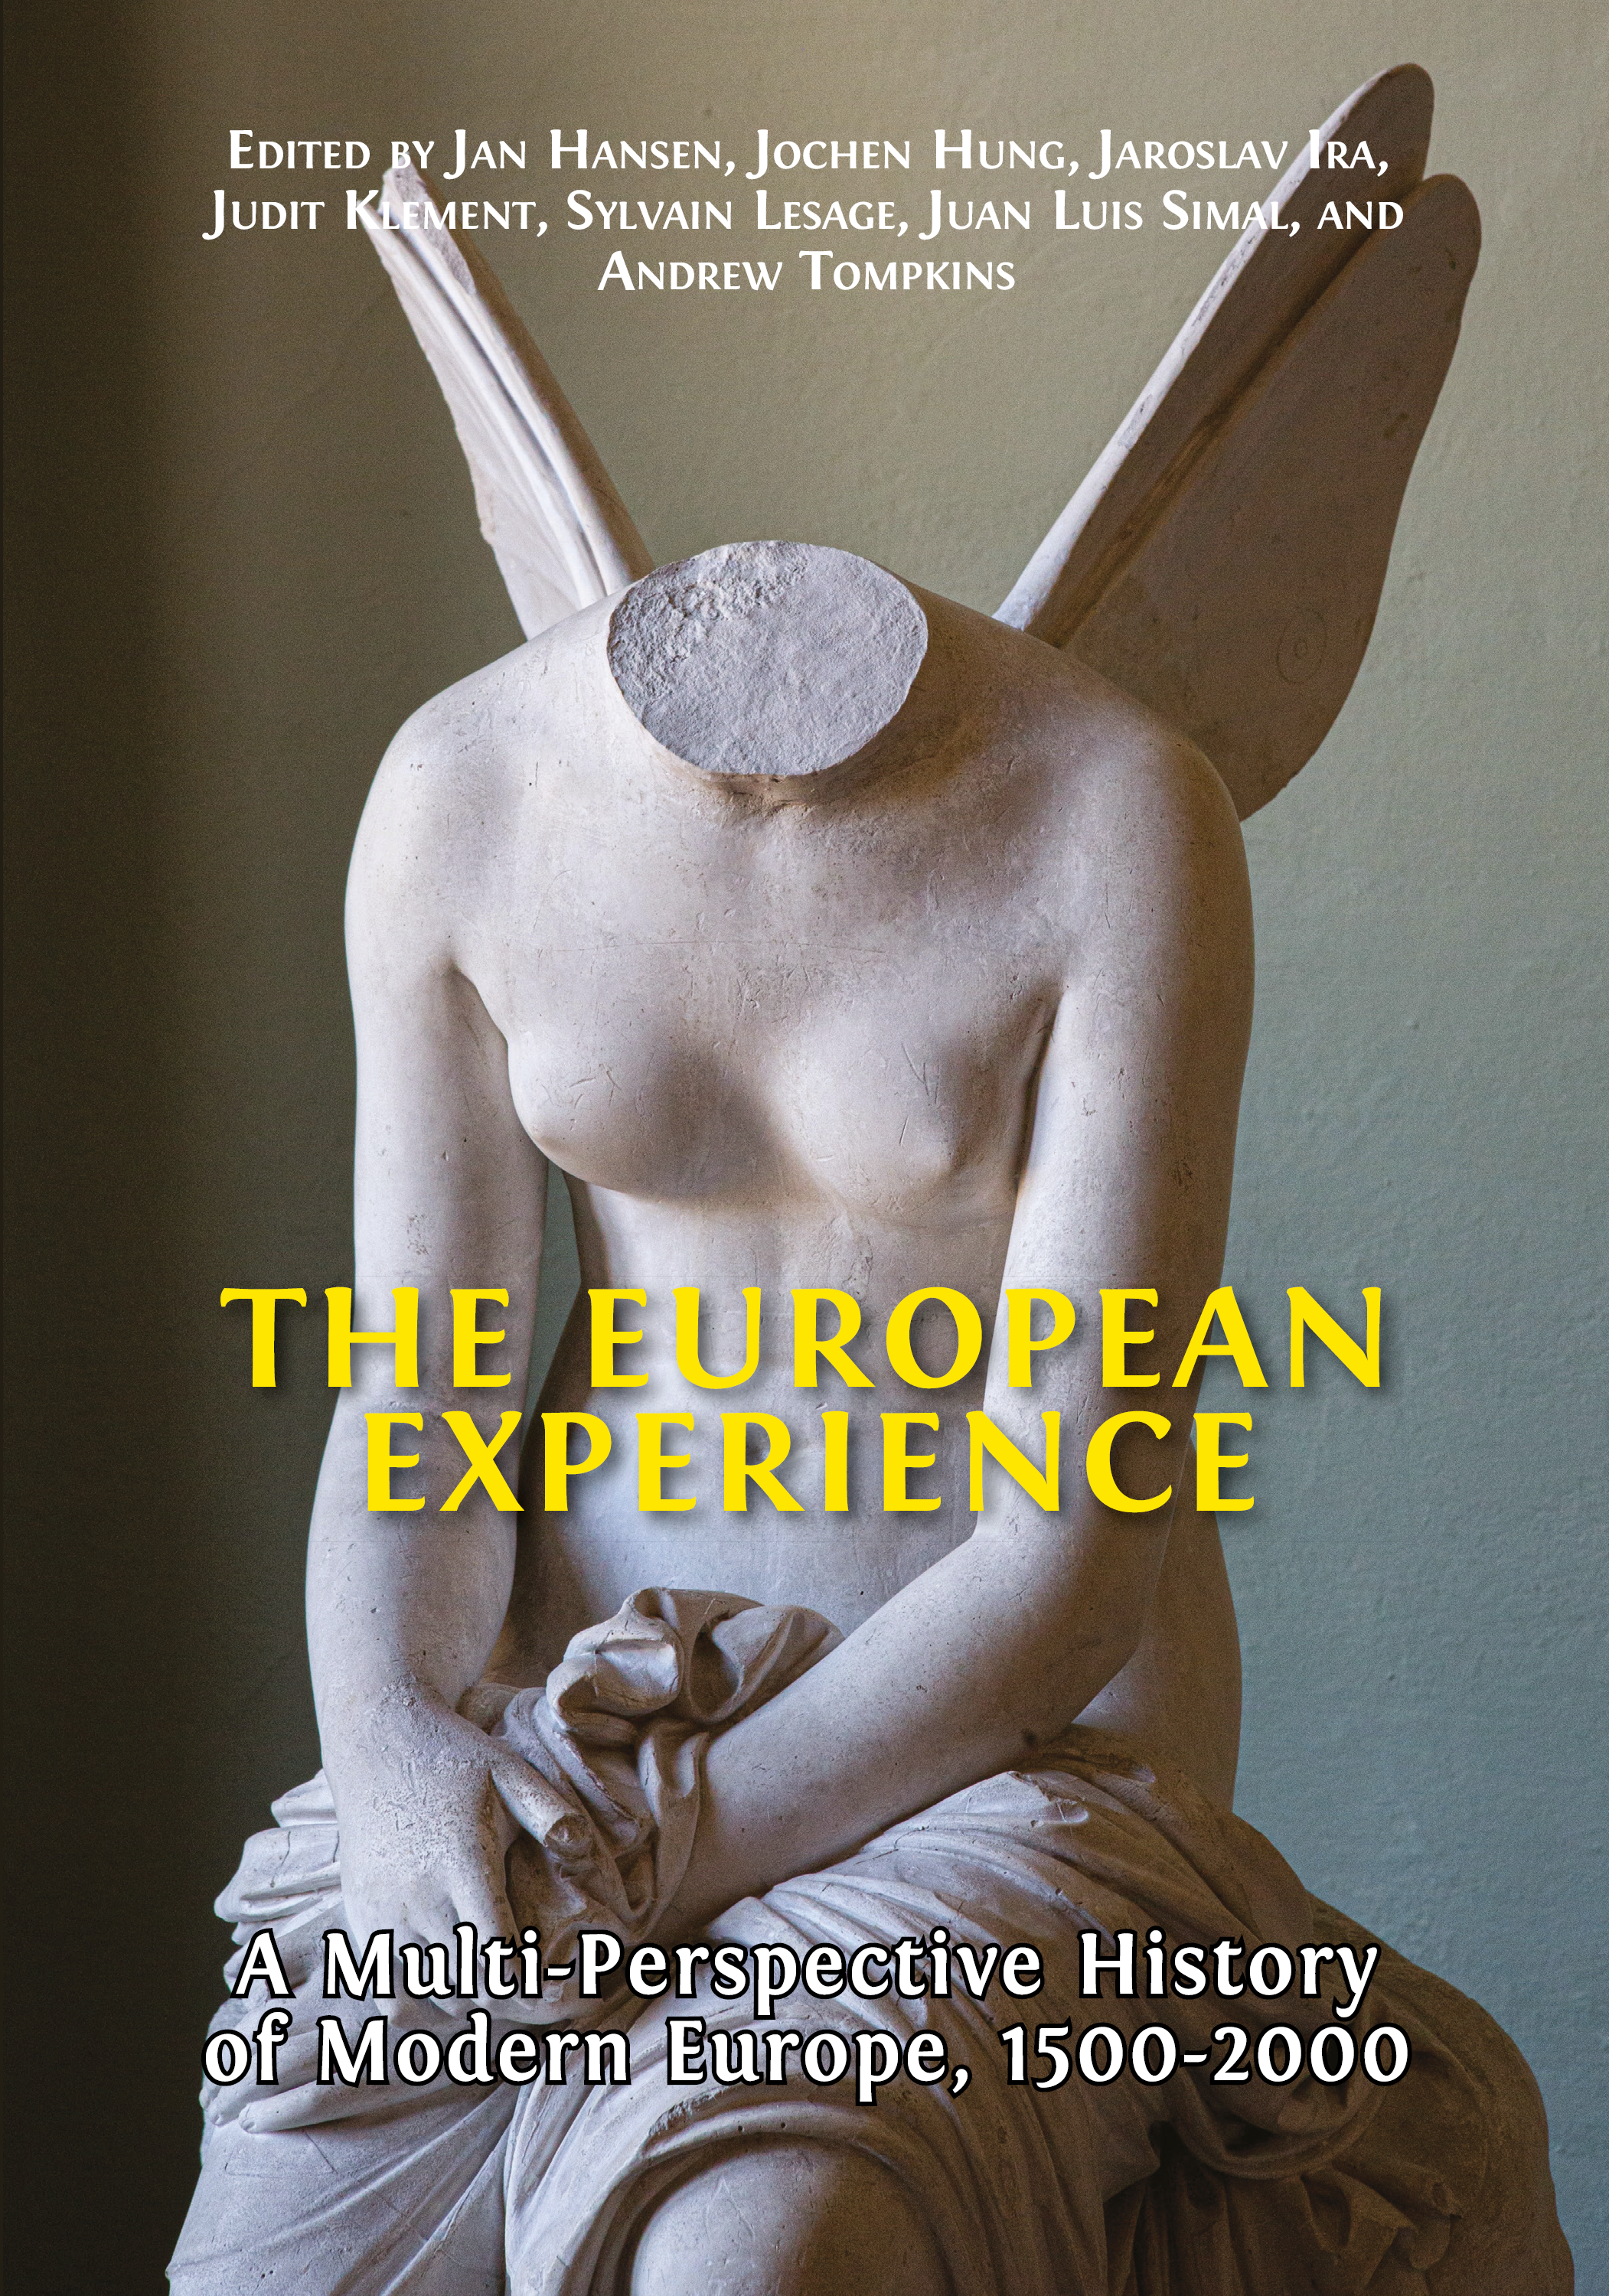 The European Experience book cover image